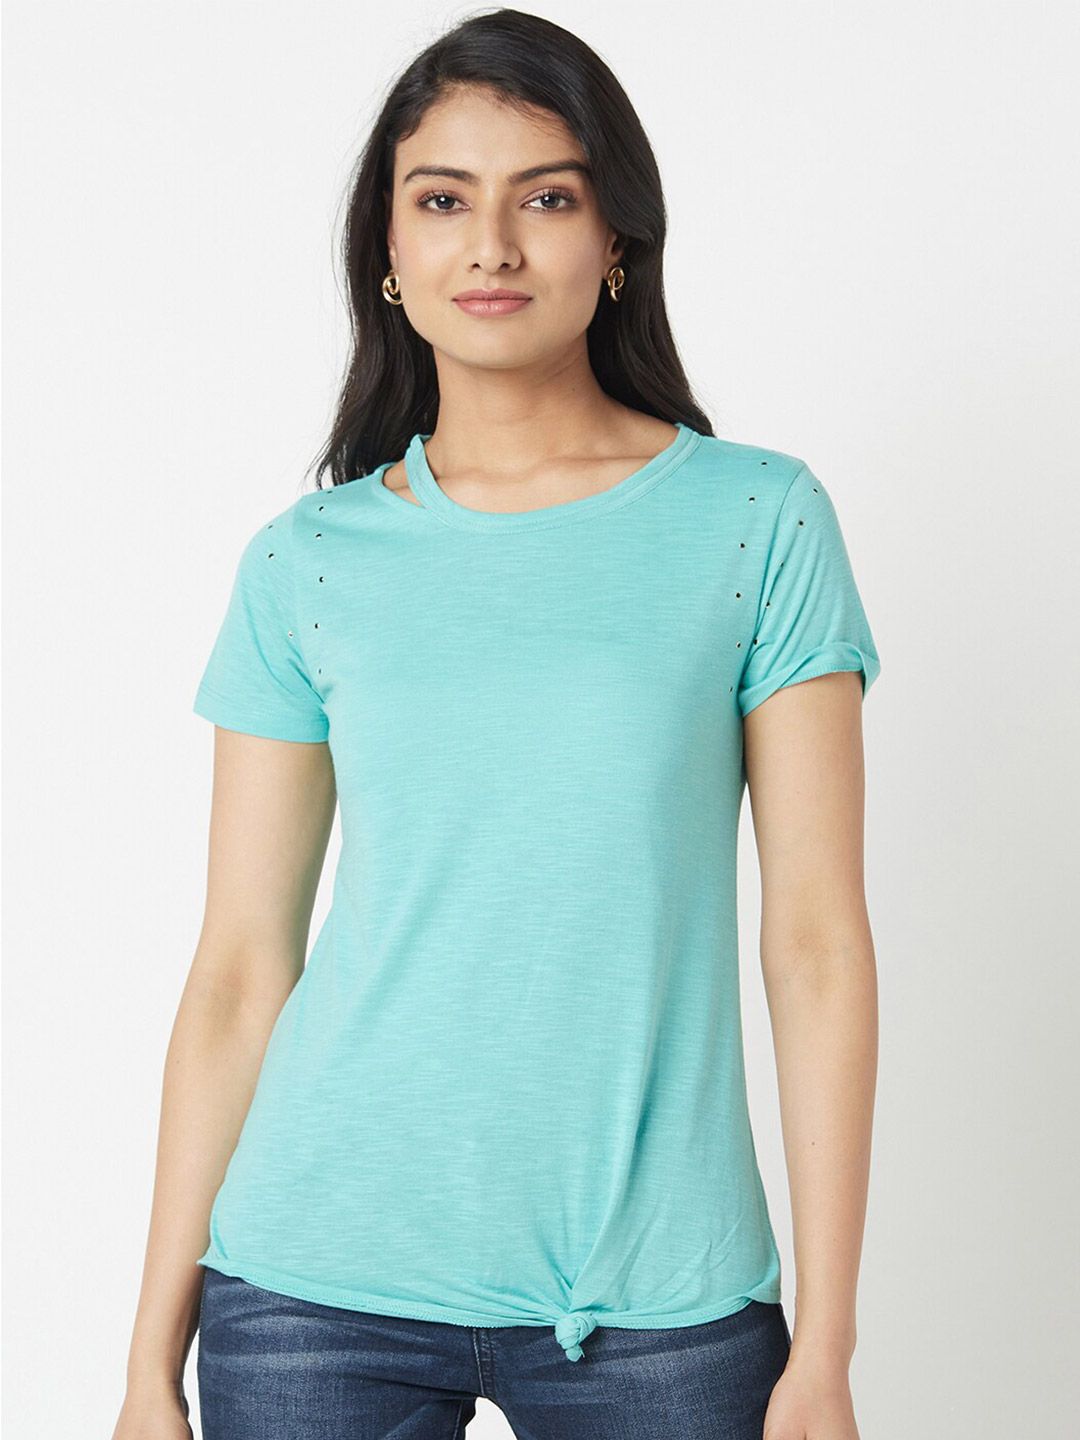 Miss Grace Cut Out Cotton Regular Top Price in India